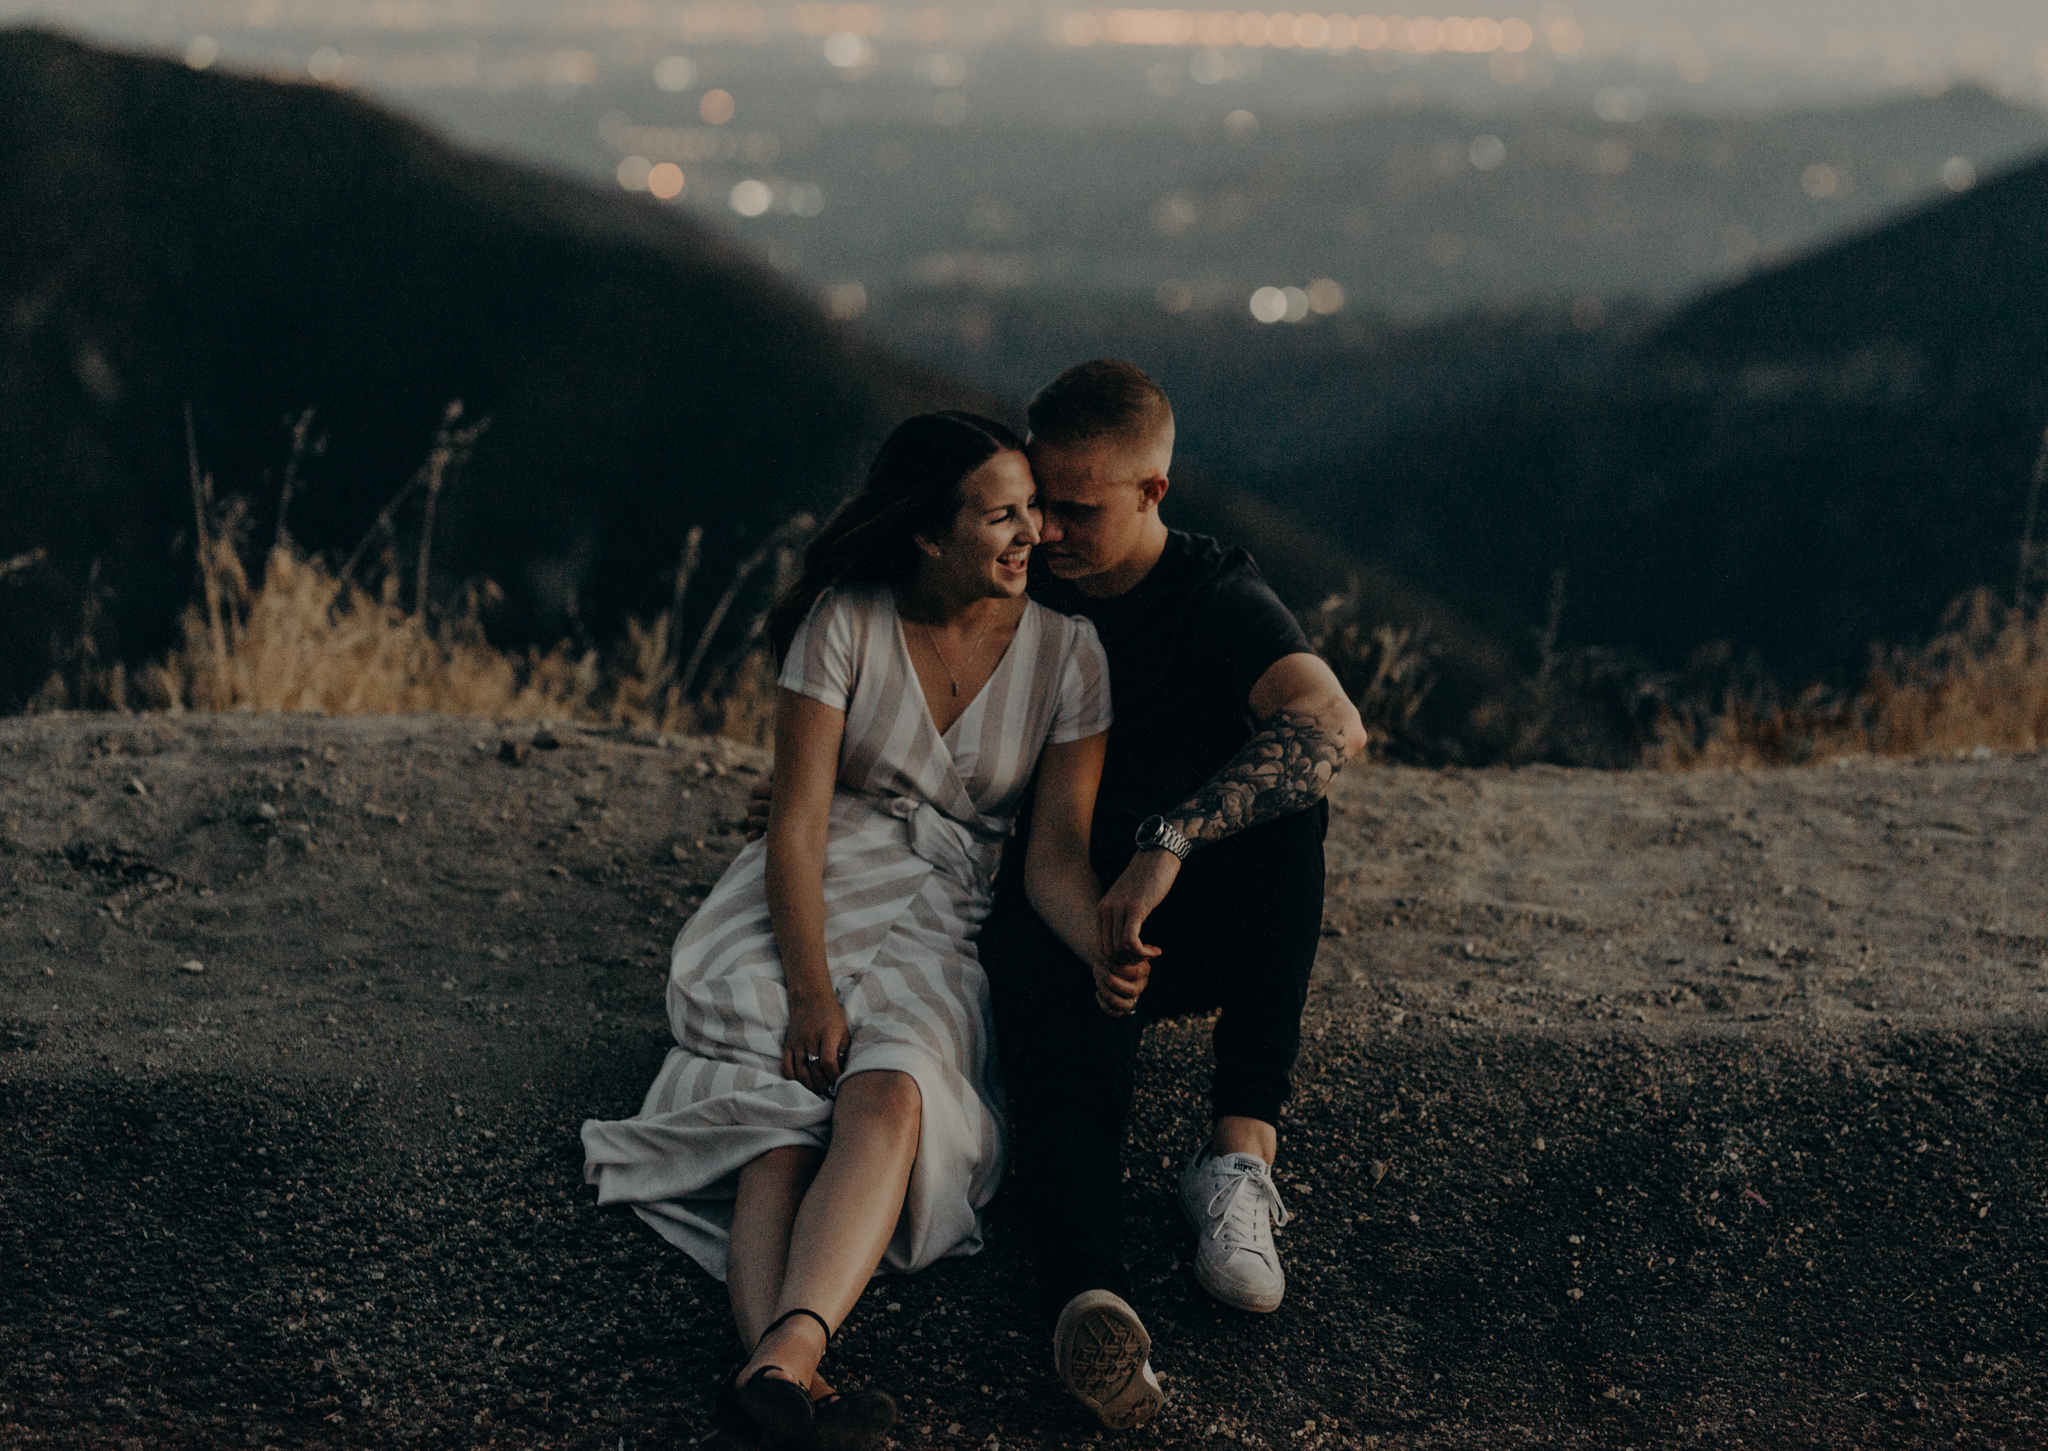 Isaiah + Taylor Photography - Los Angeles Forest Engagement Session - Laid back wedding photographer-050.jpg